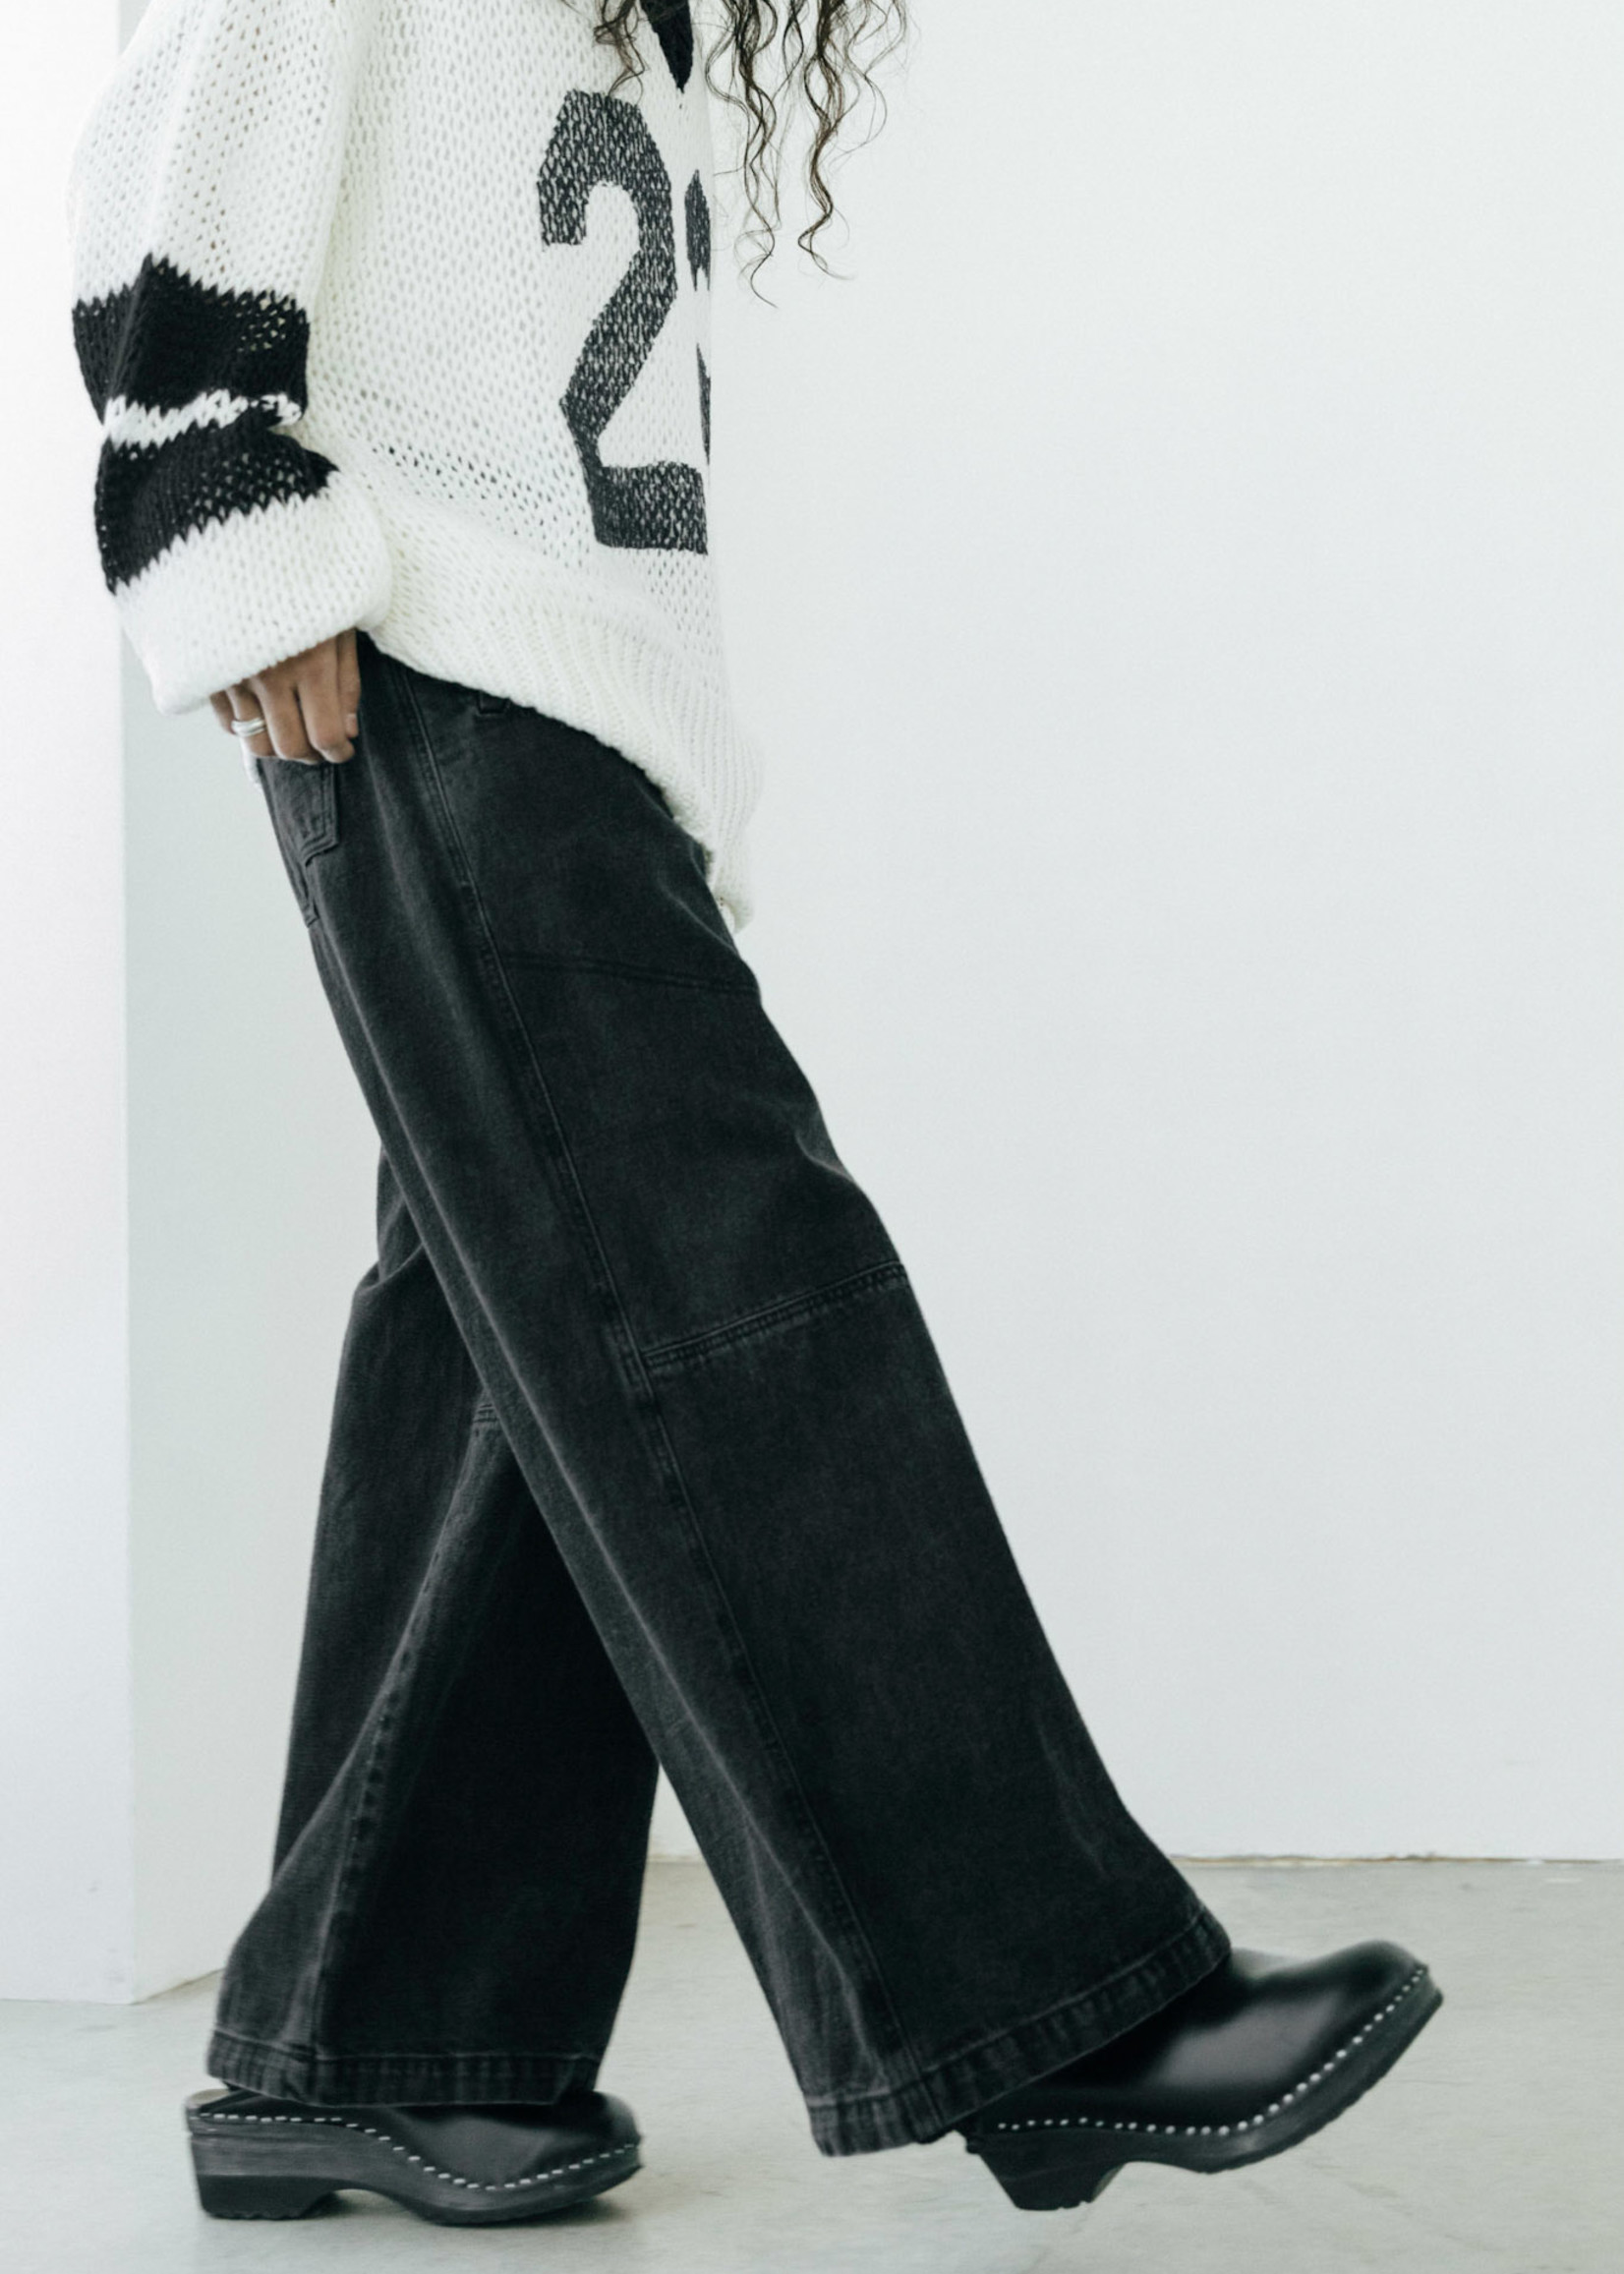 WILLY CHAVARRIA Raver Wide Leg Jeans in Washed Black